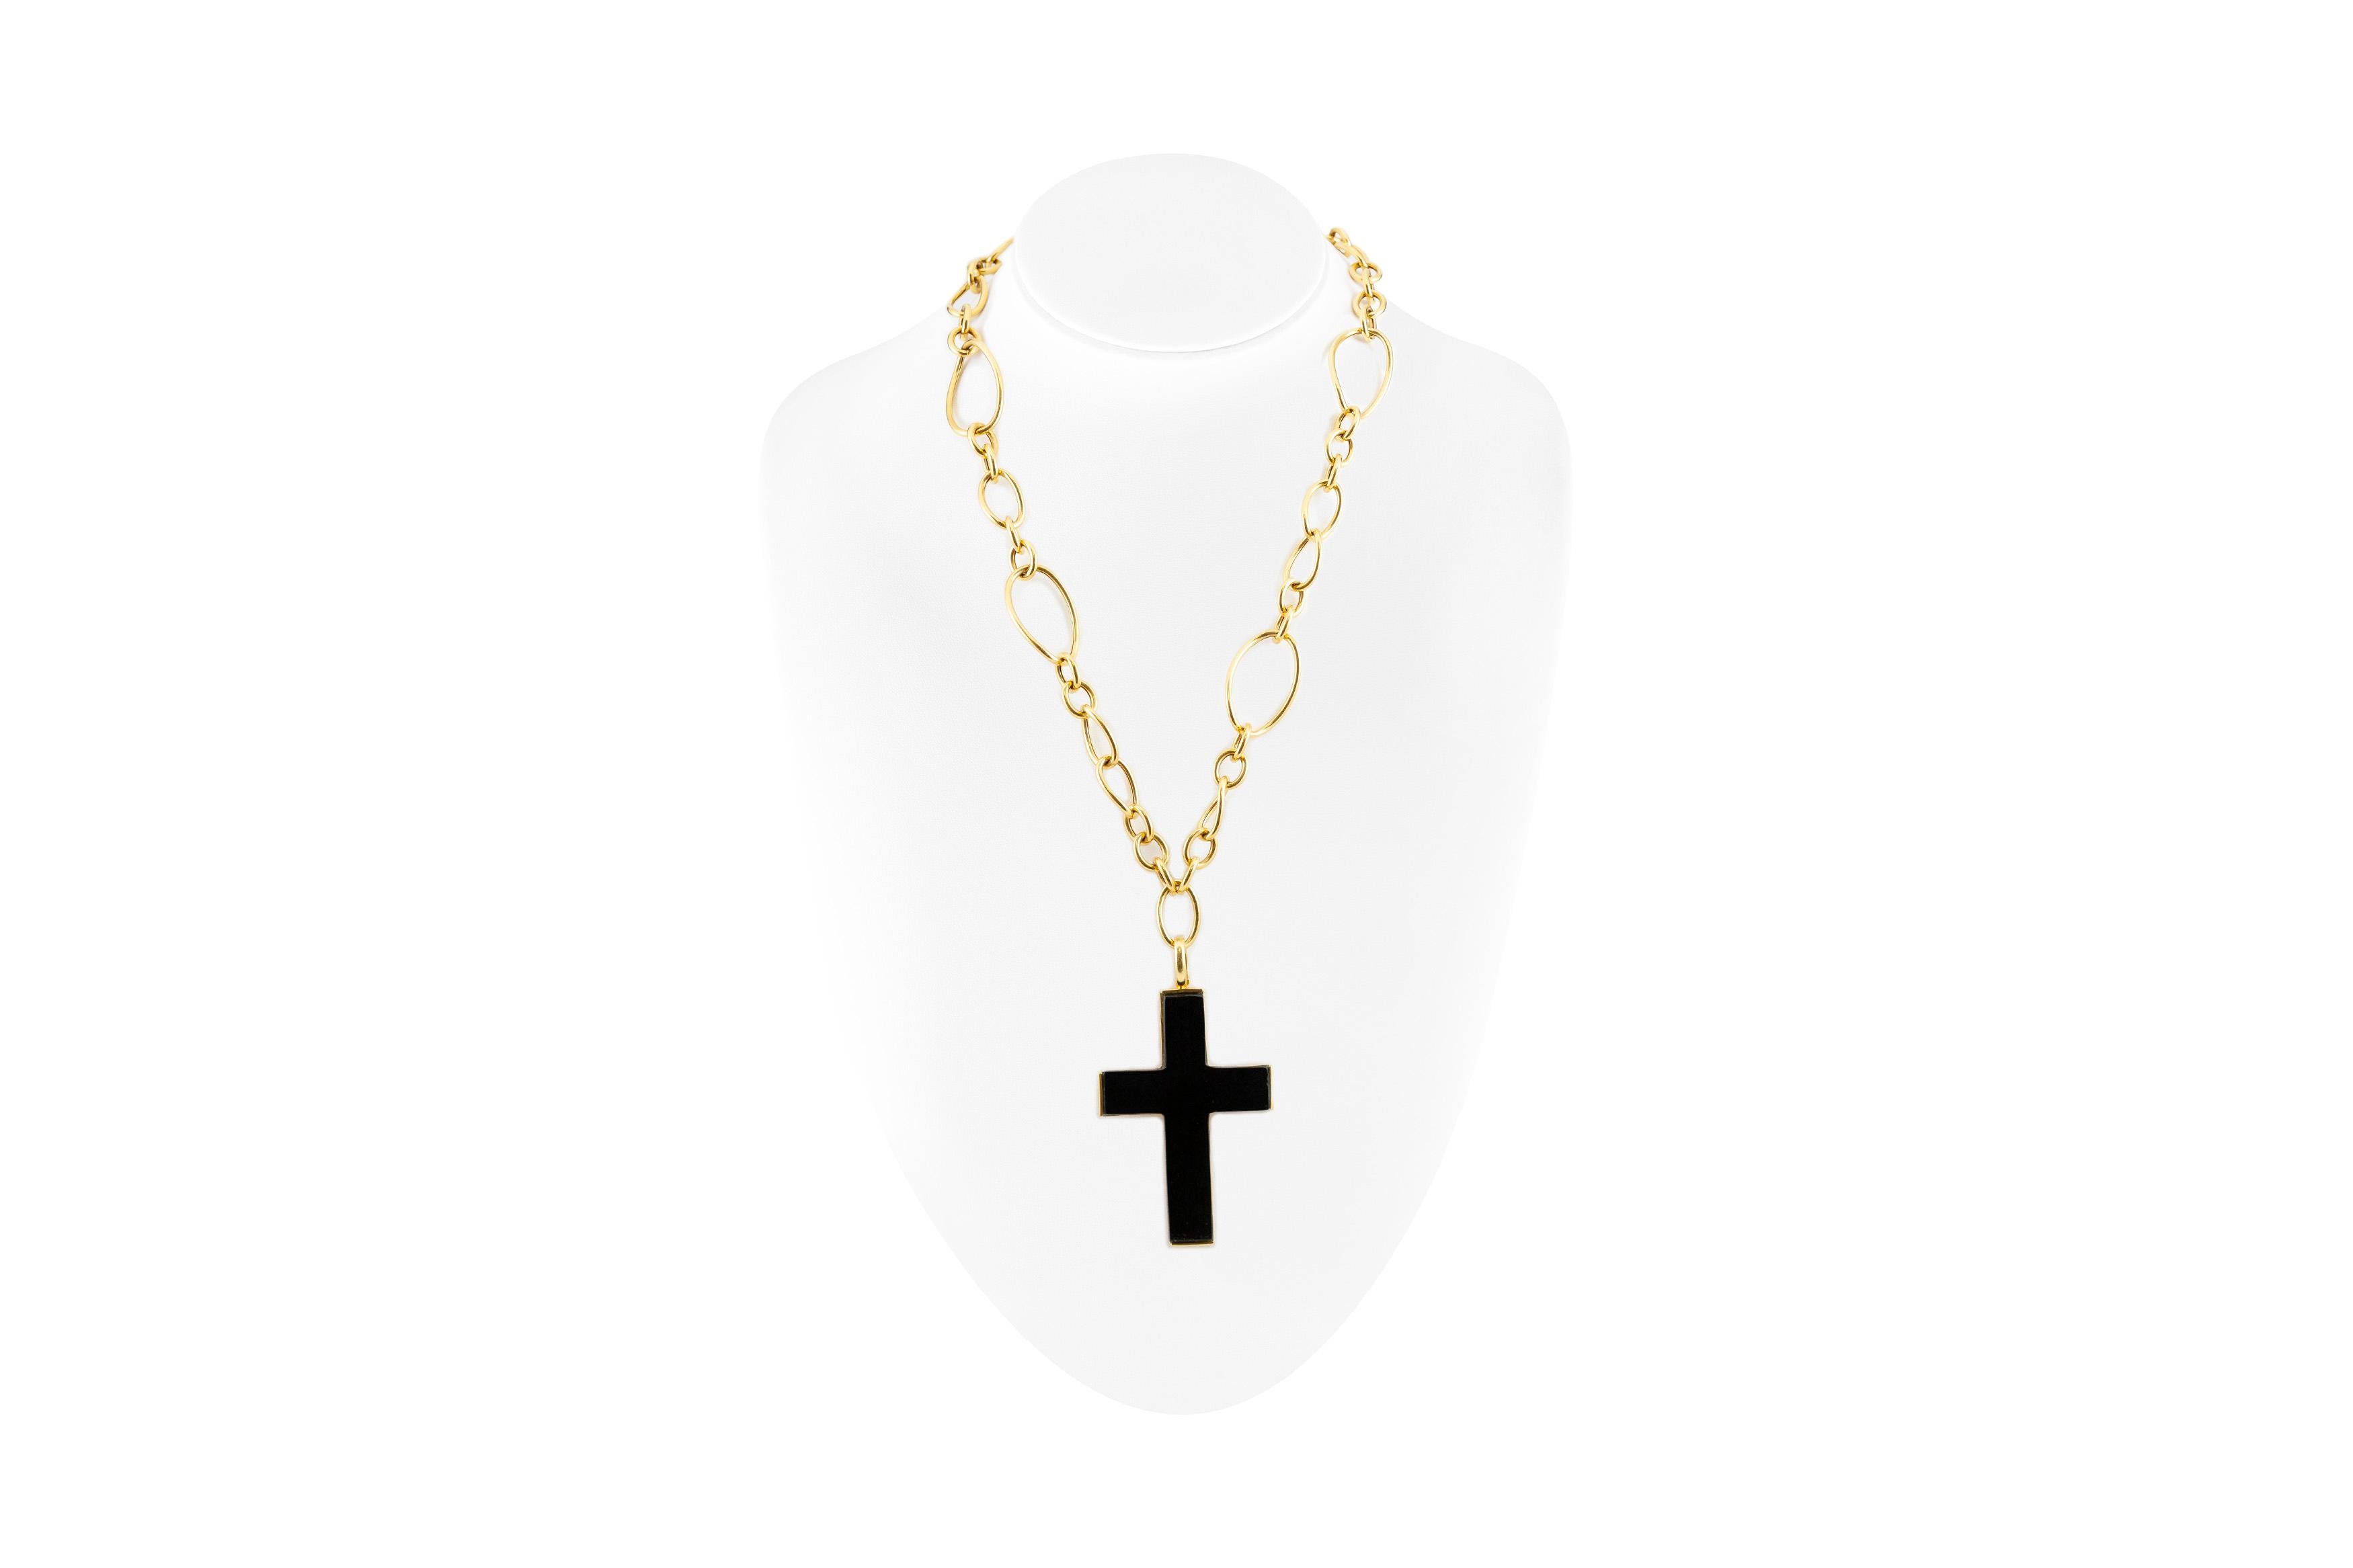 18 Karat Farone Manela Open Link Necklace with Cross Pendant with Black Onyx In Excellent Condition For Sale In New York, NY